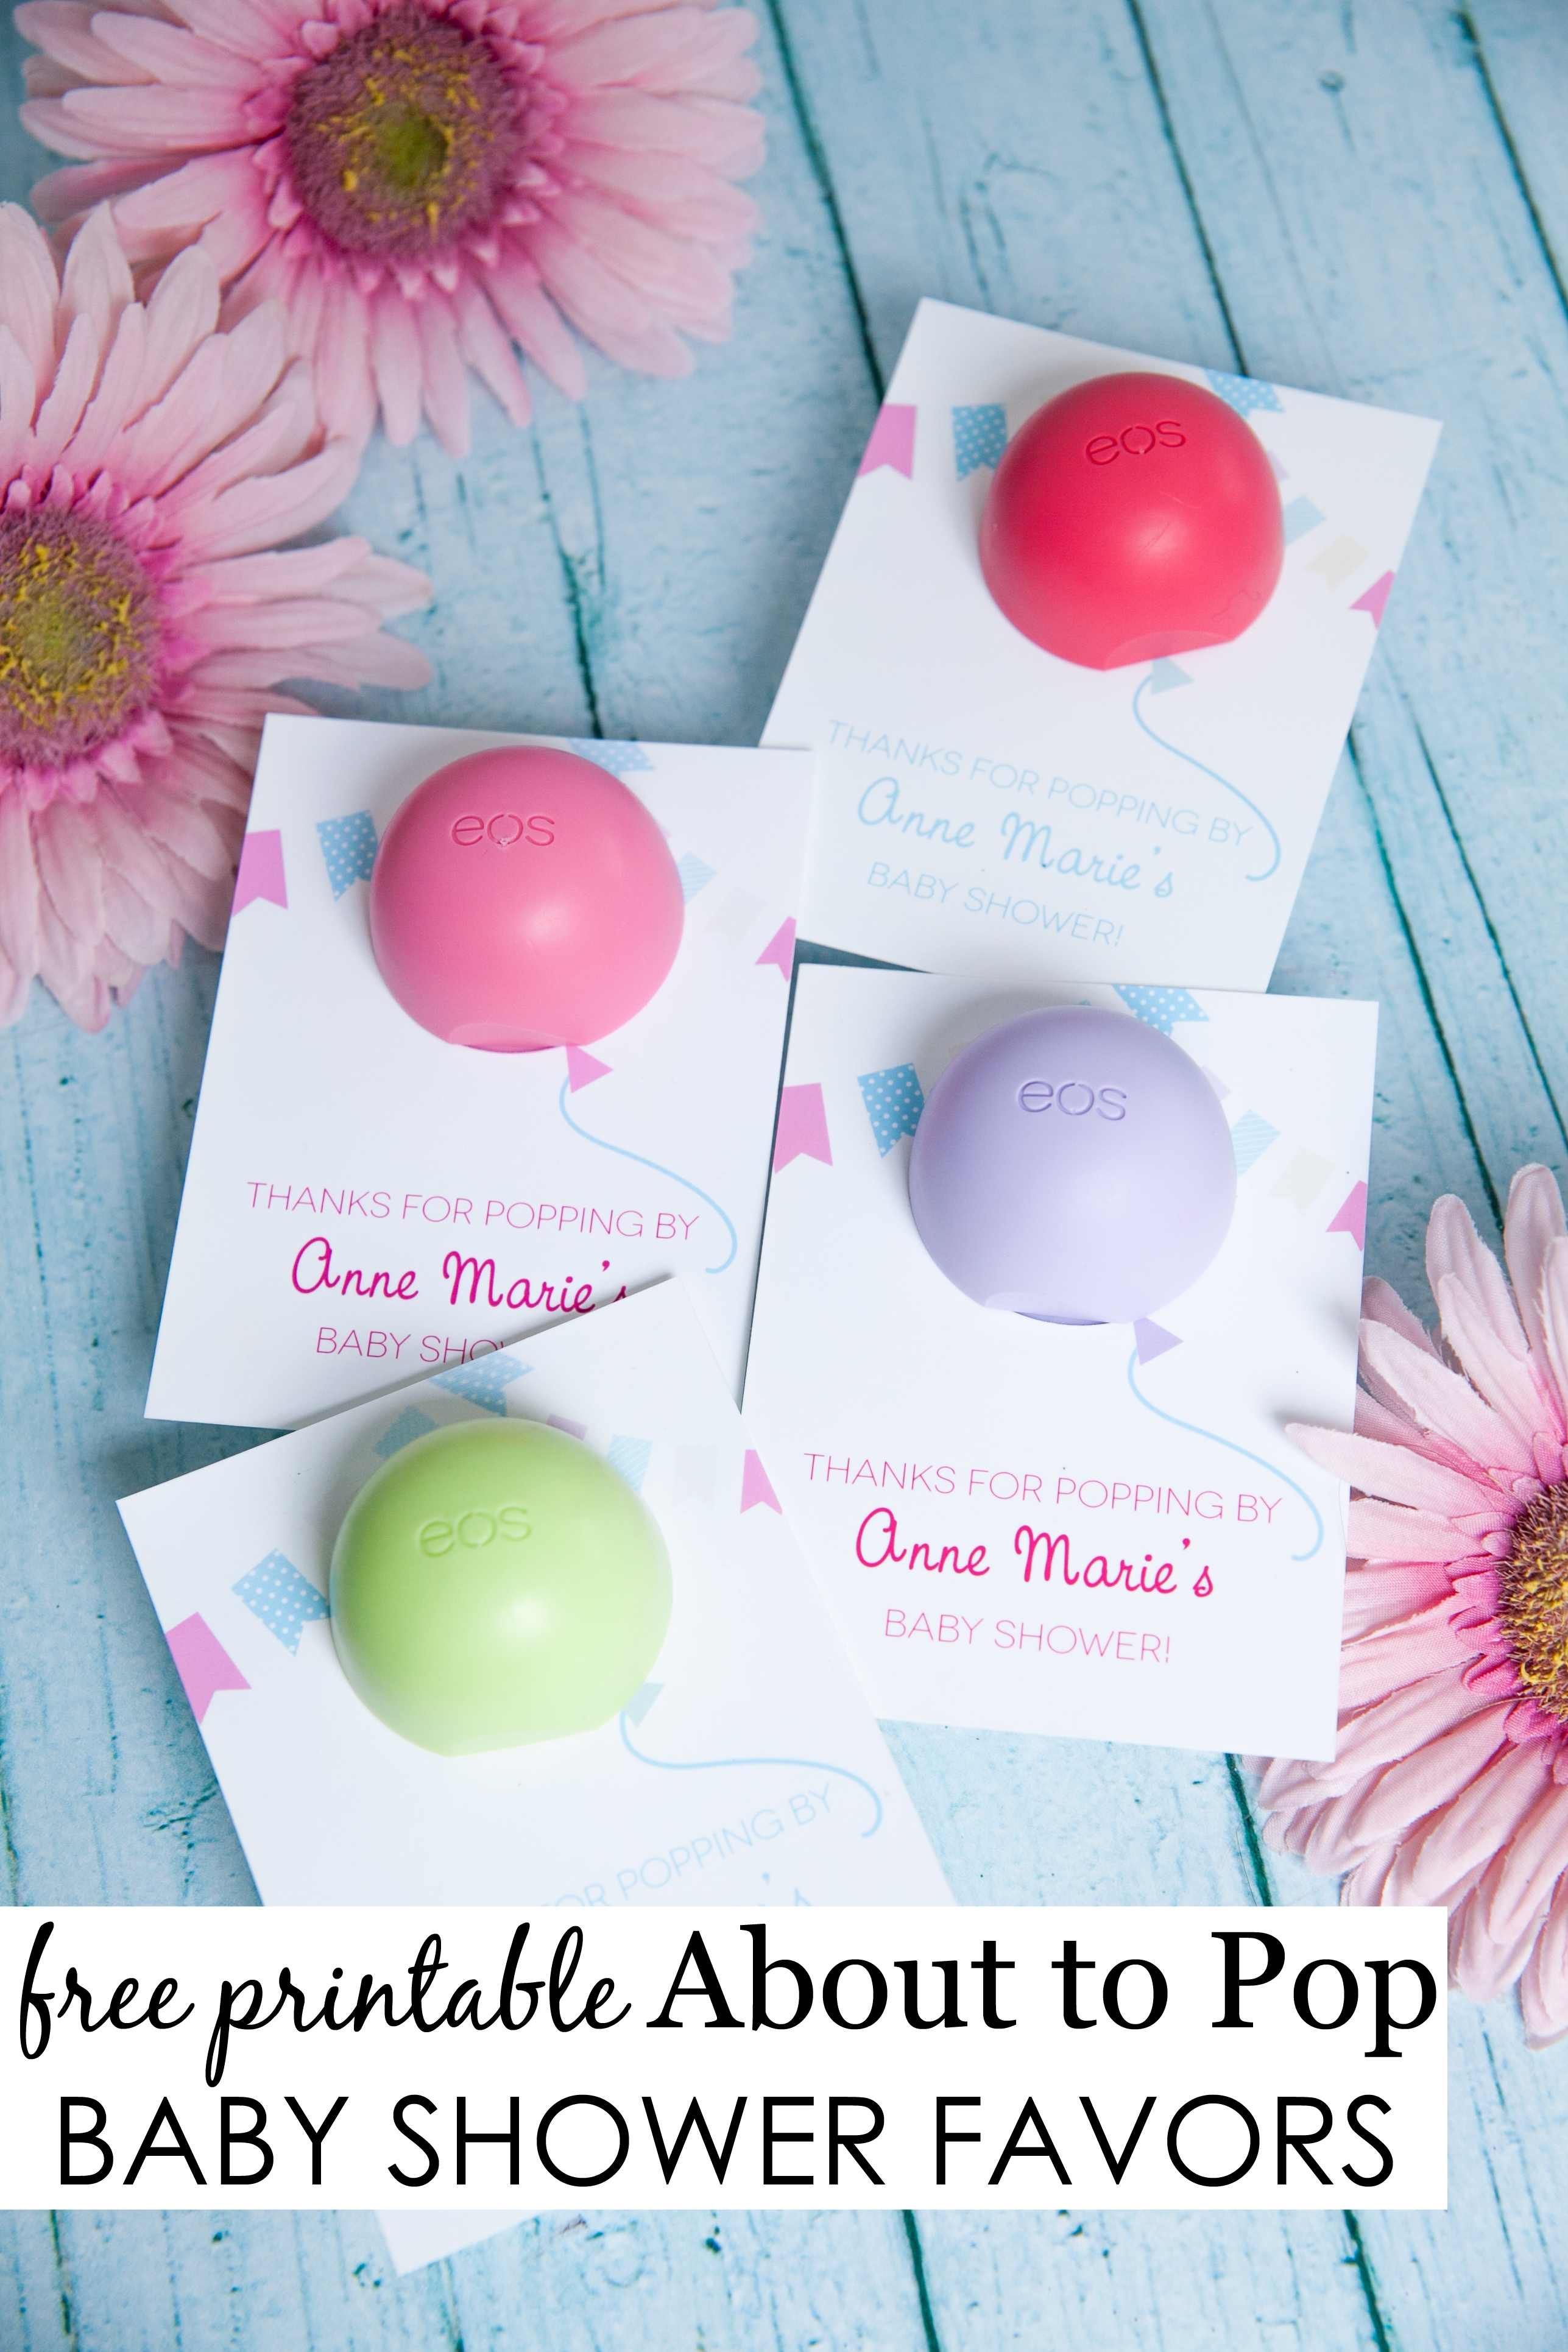 10 Most Recommended Baby Girl Shower Favor Ideas about to pop baby shower favor eos lip balm shower favors and eos 2022